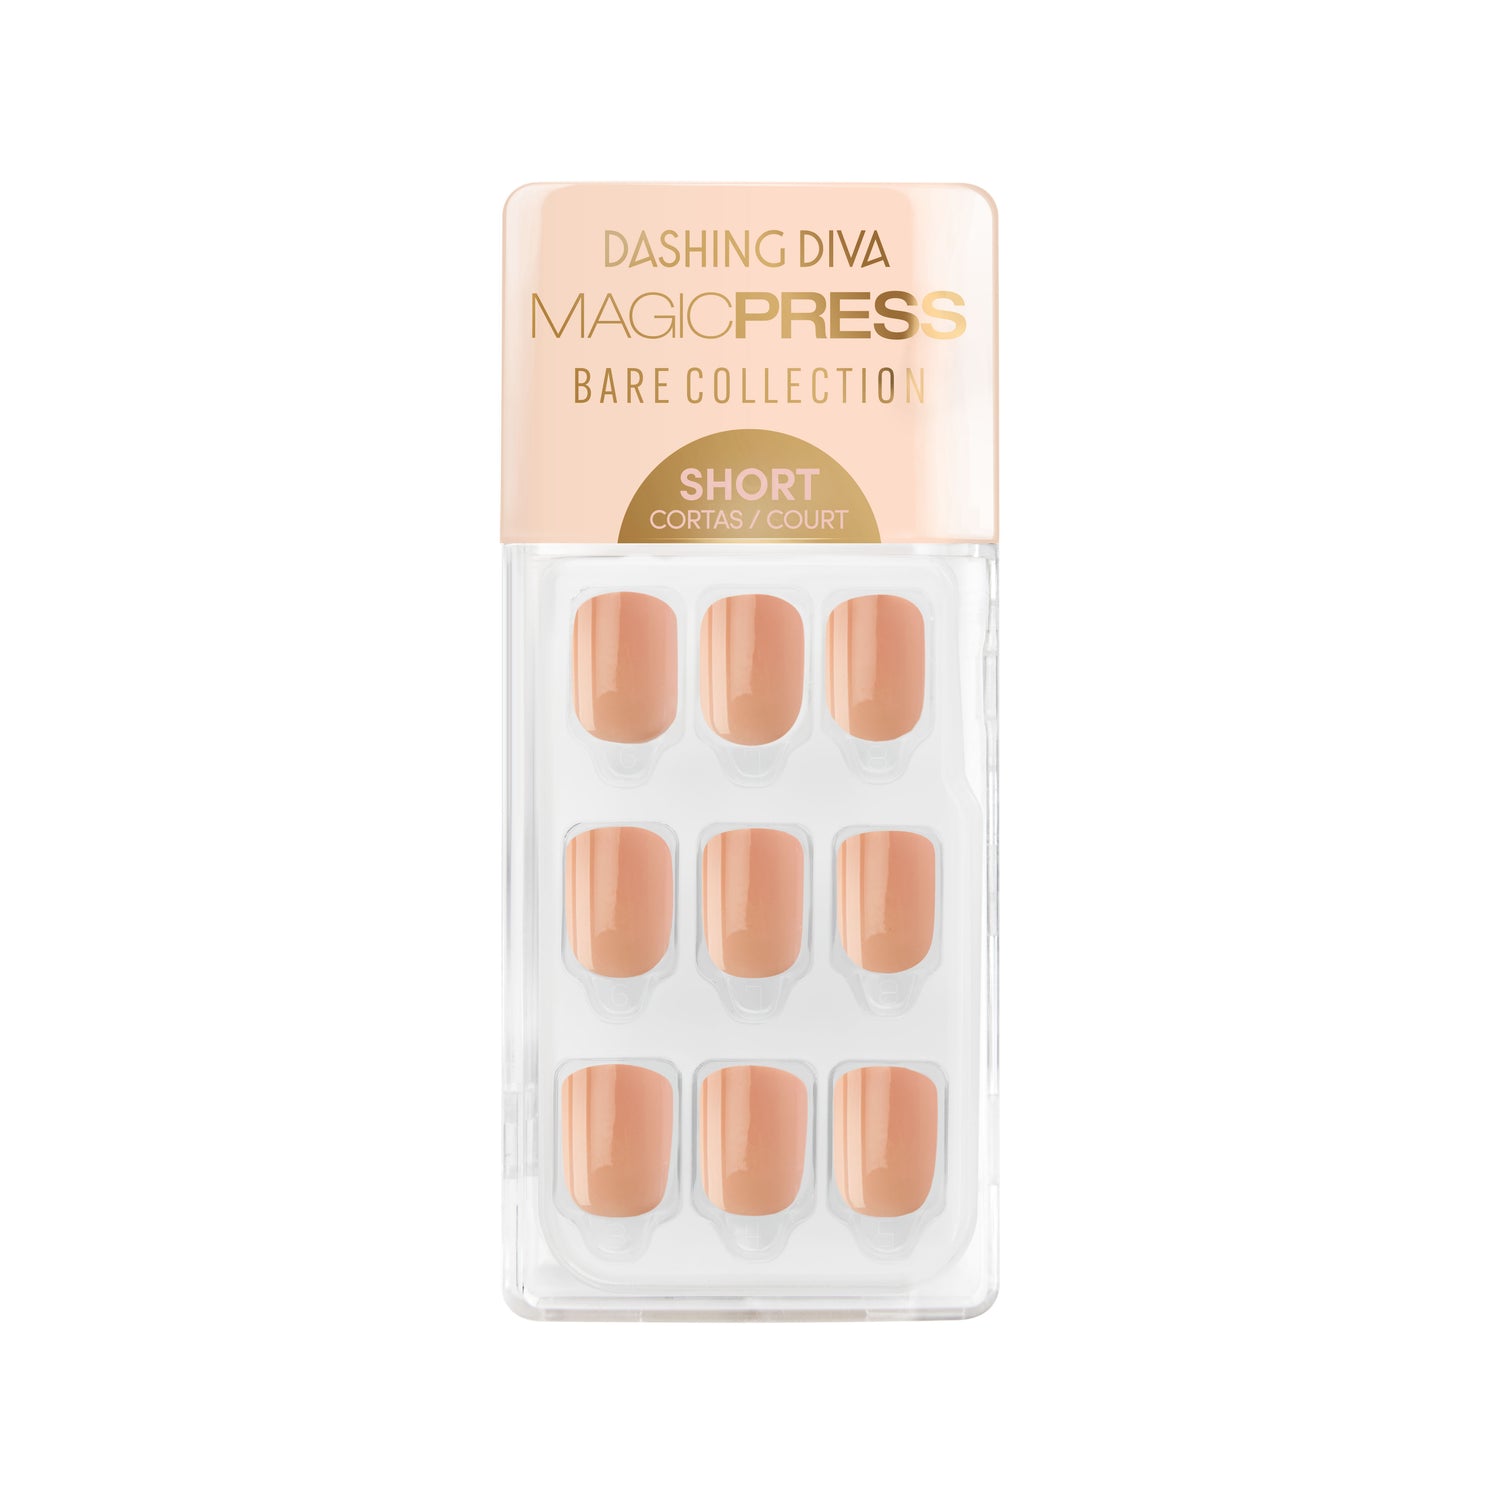 Short length, square shape, warm peachy-nude press-on gel nails featuring a sheer, glossy finish